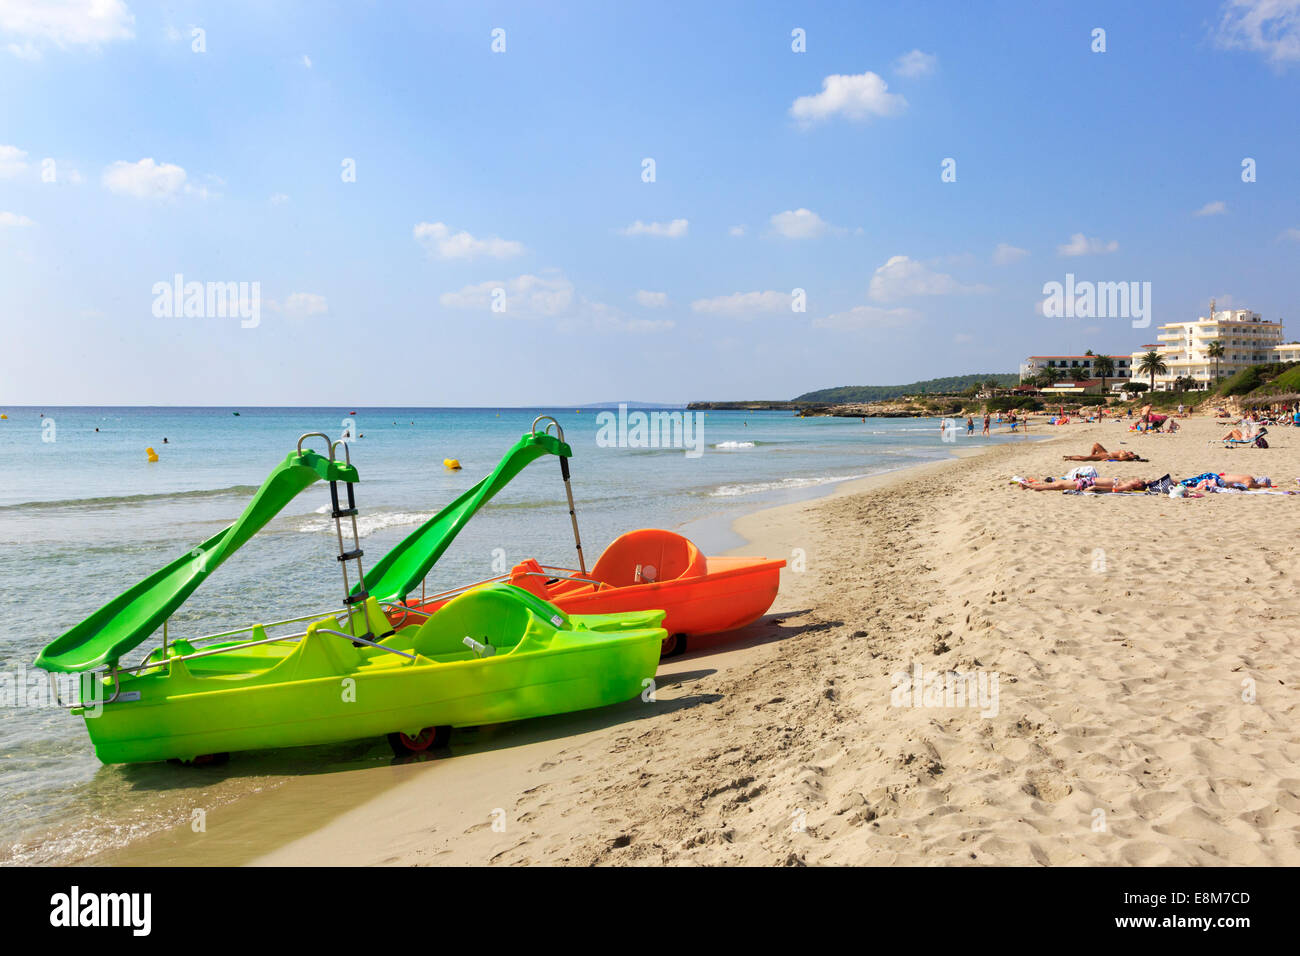 Beach at Sant Tomas with tourists sunbathing and two plastic pedalos, Menorca, Balearic Islands, Spain Stock Photo